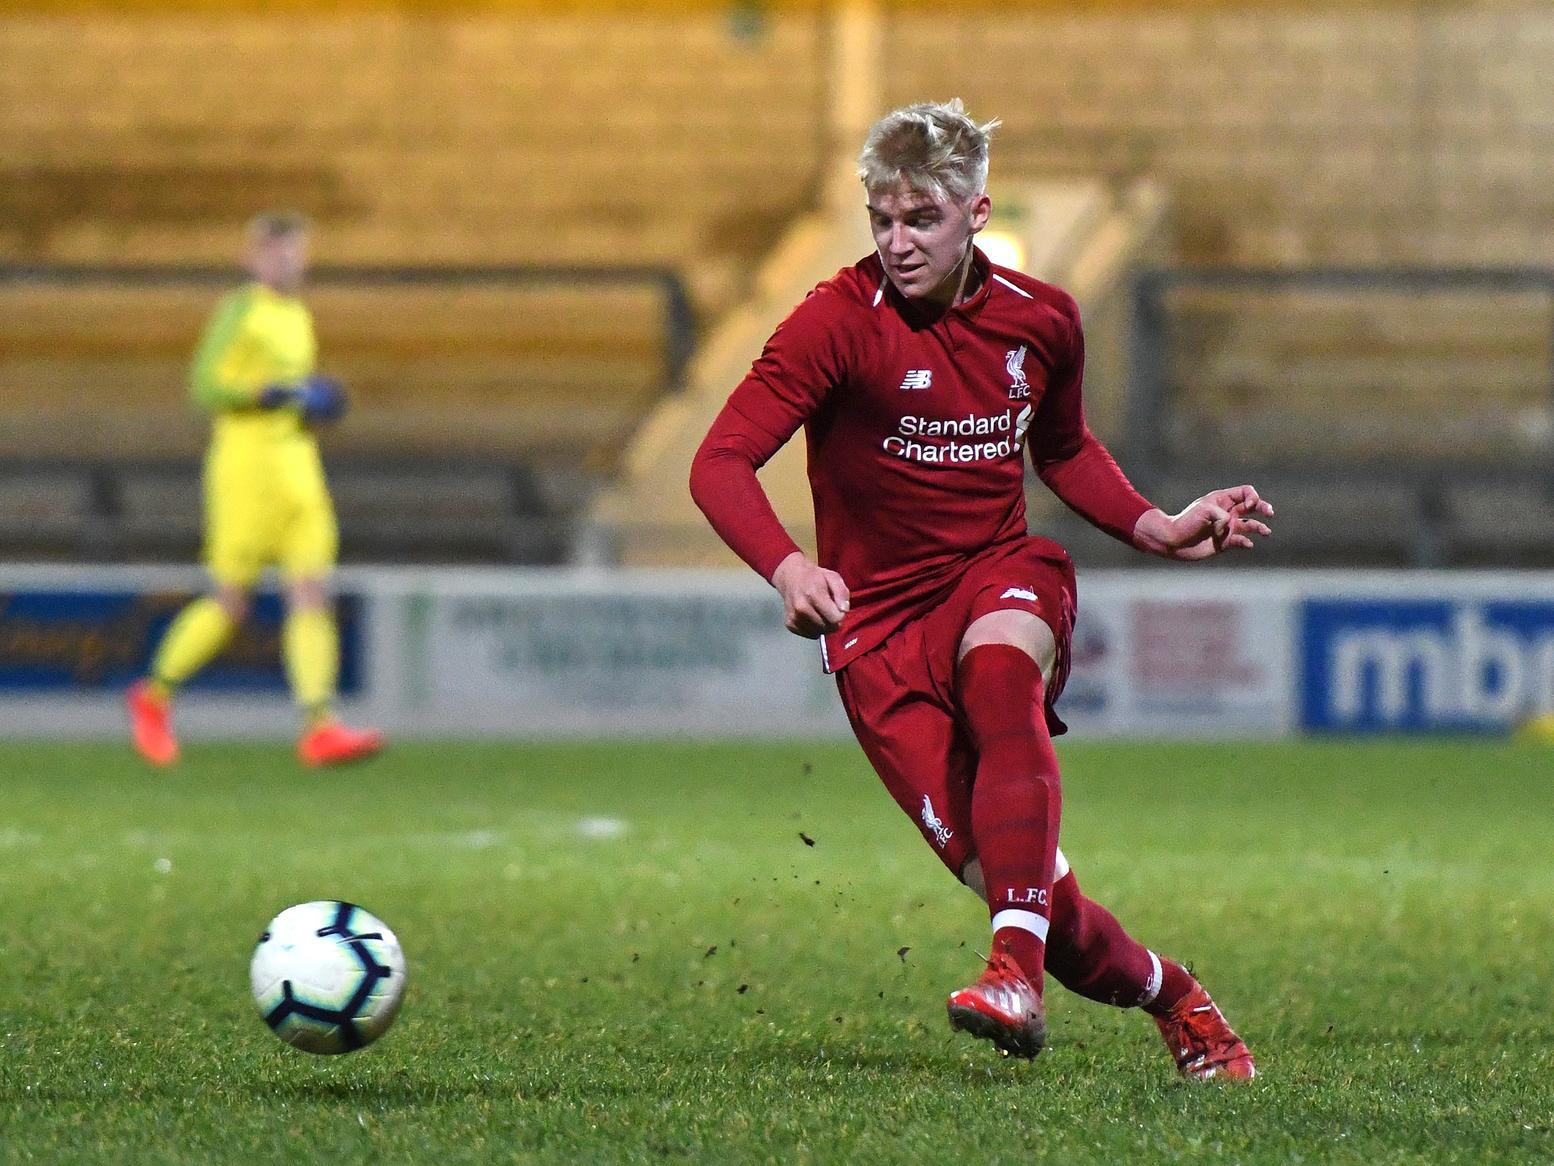 A talented midfielder who started with Newcastle United, Longstaff - who is 19-years-old and no relation to brothers Matty and Sean Longstaff - has made just one cup appearance for the Reds.